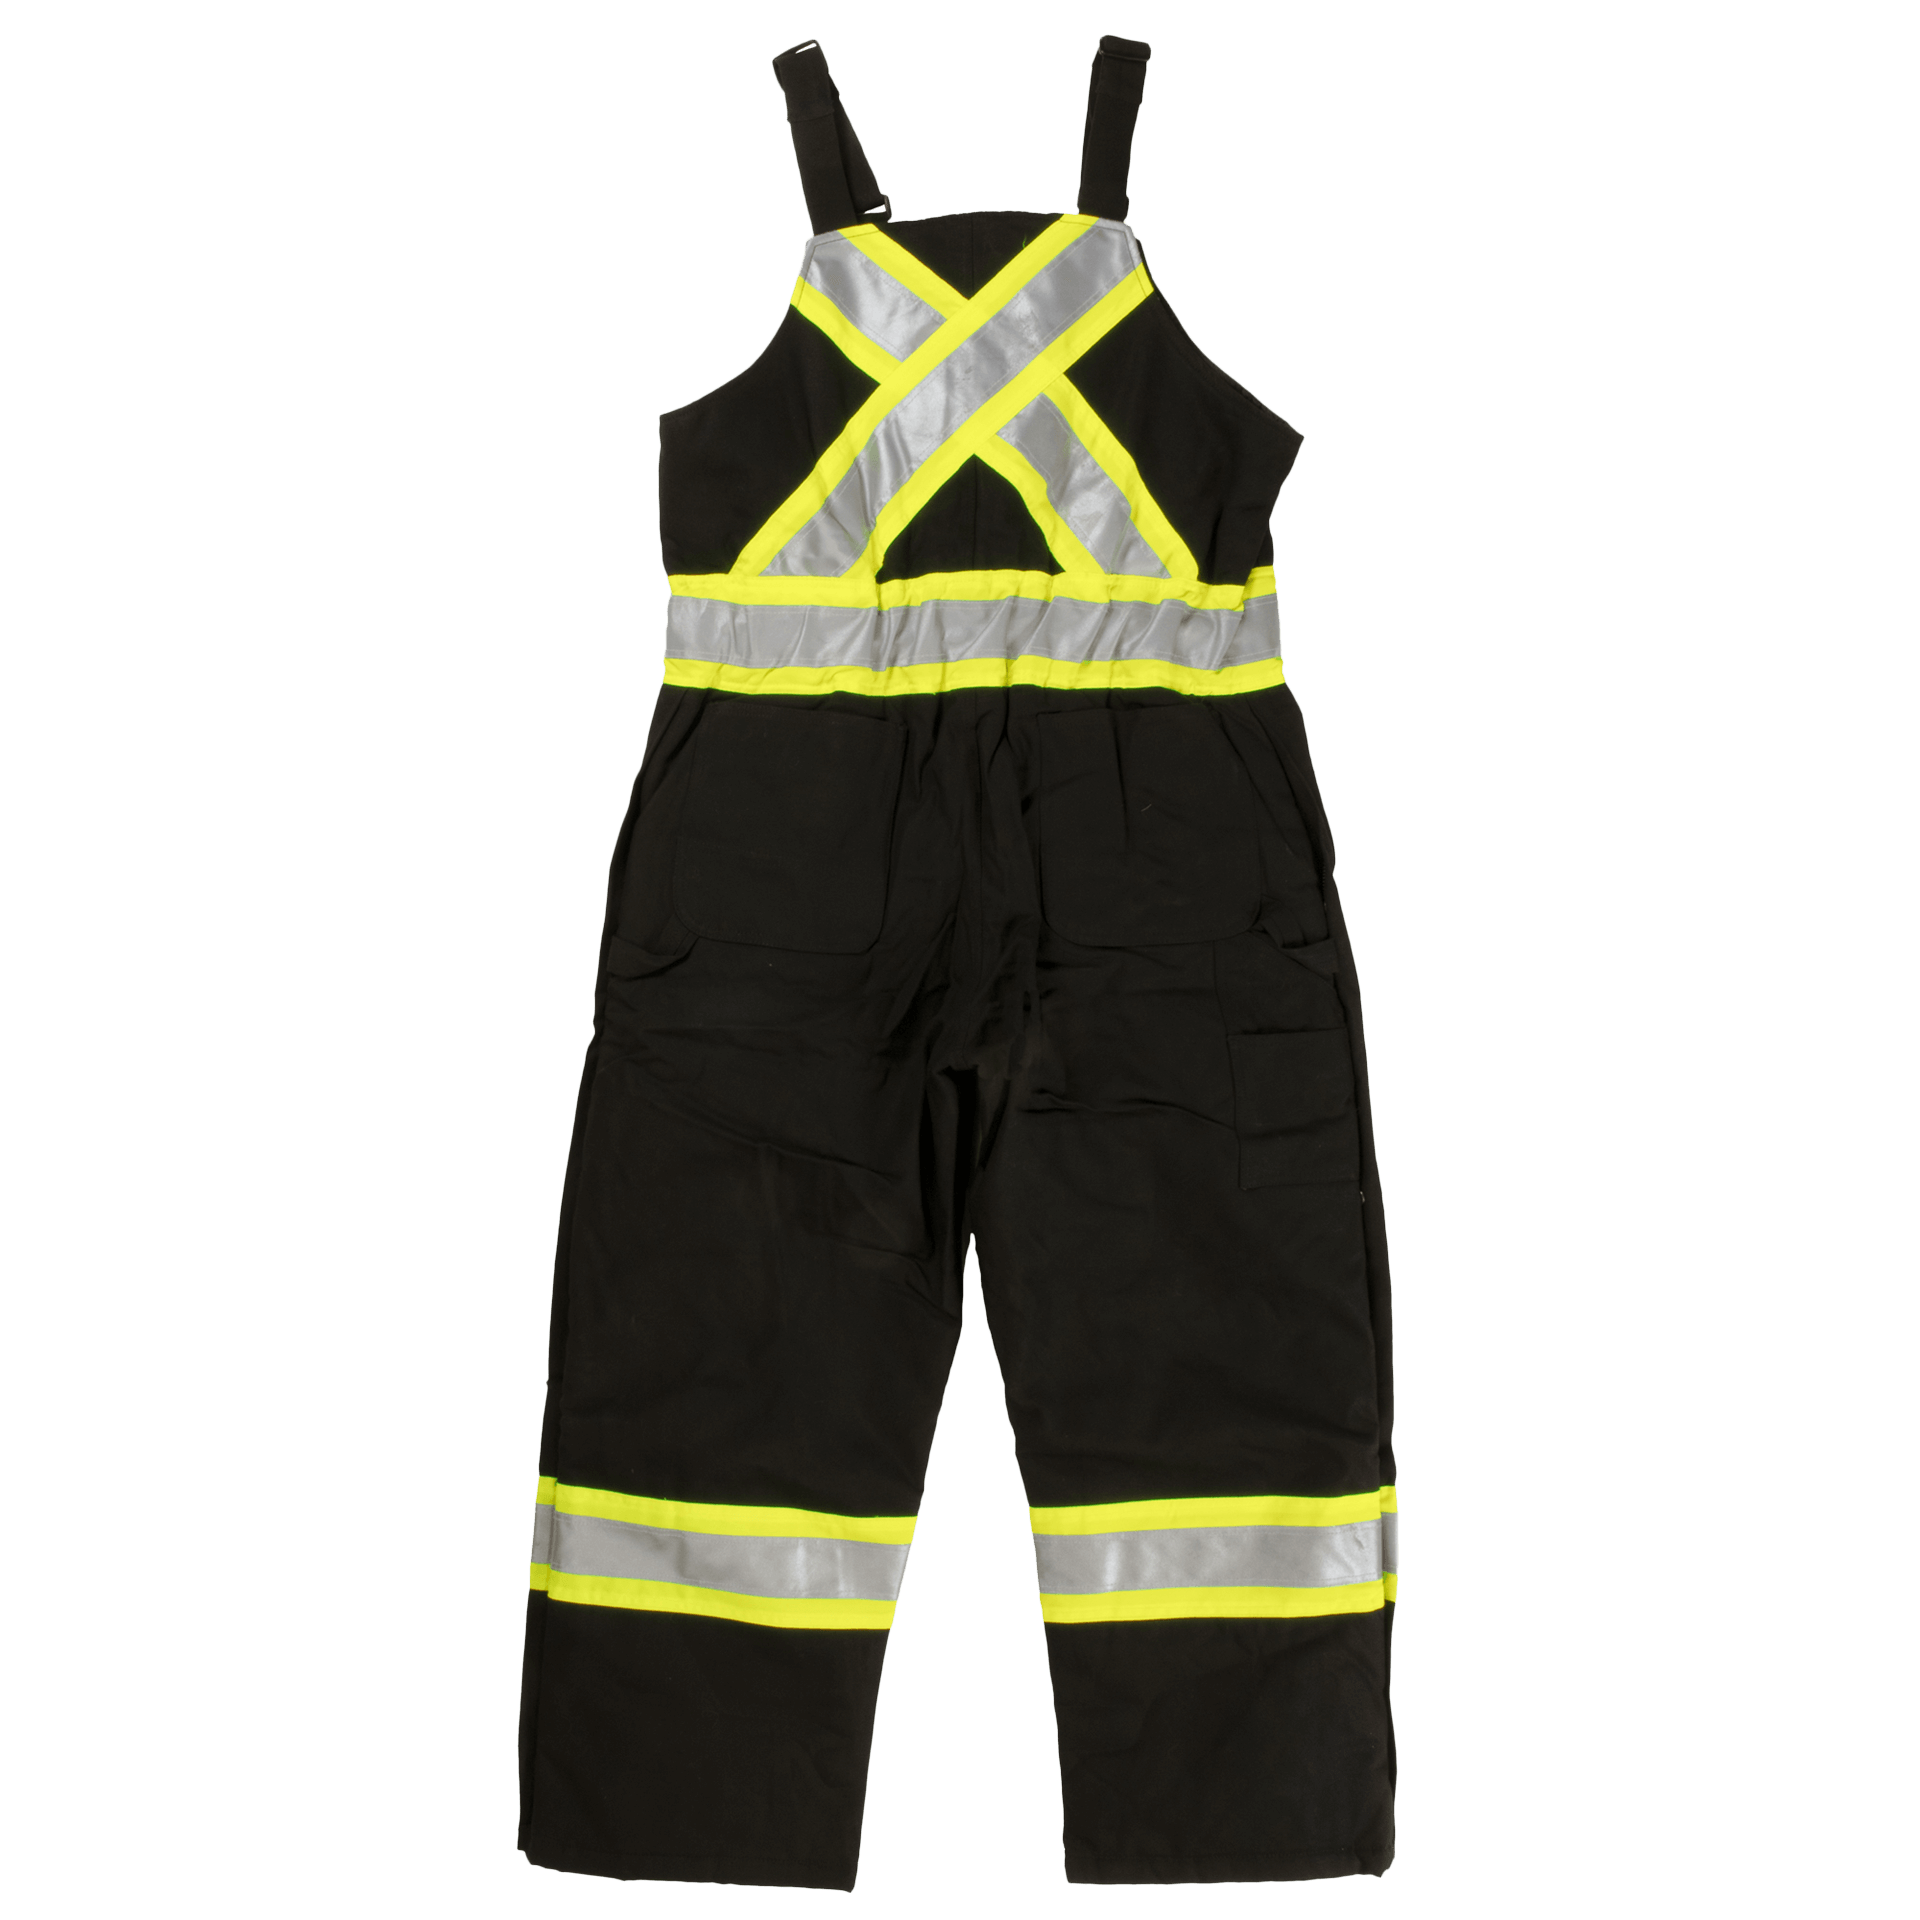 Tough Duck Insulated Safety Overall (Cotton Duck) - S757 - Black - back